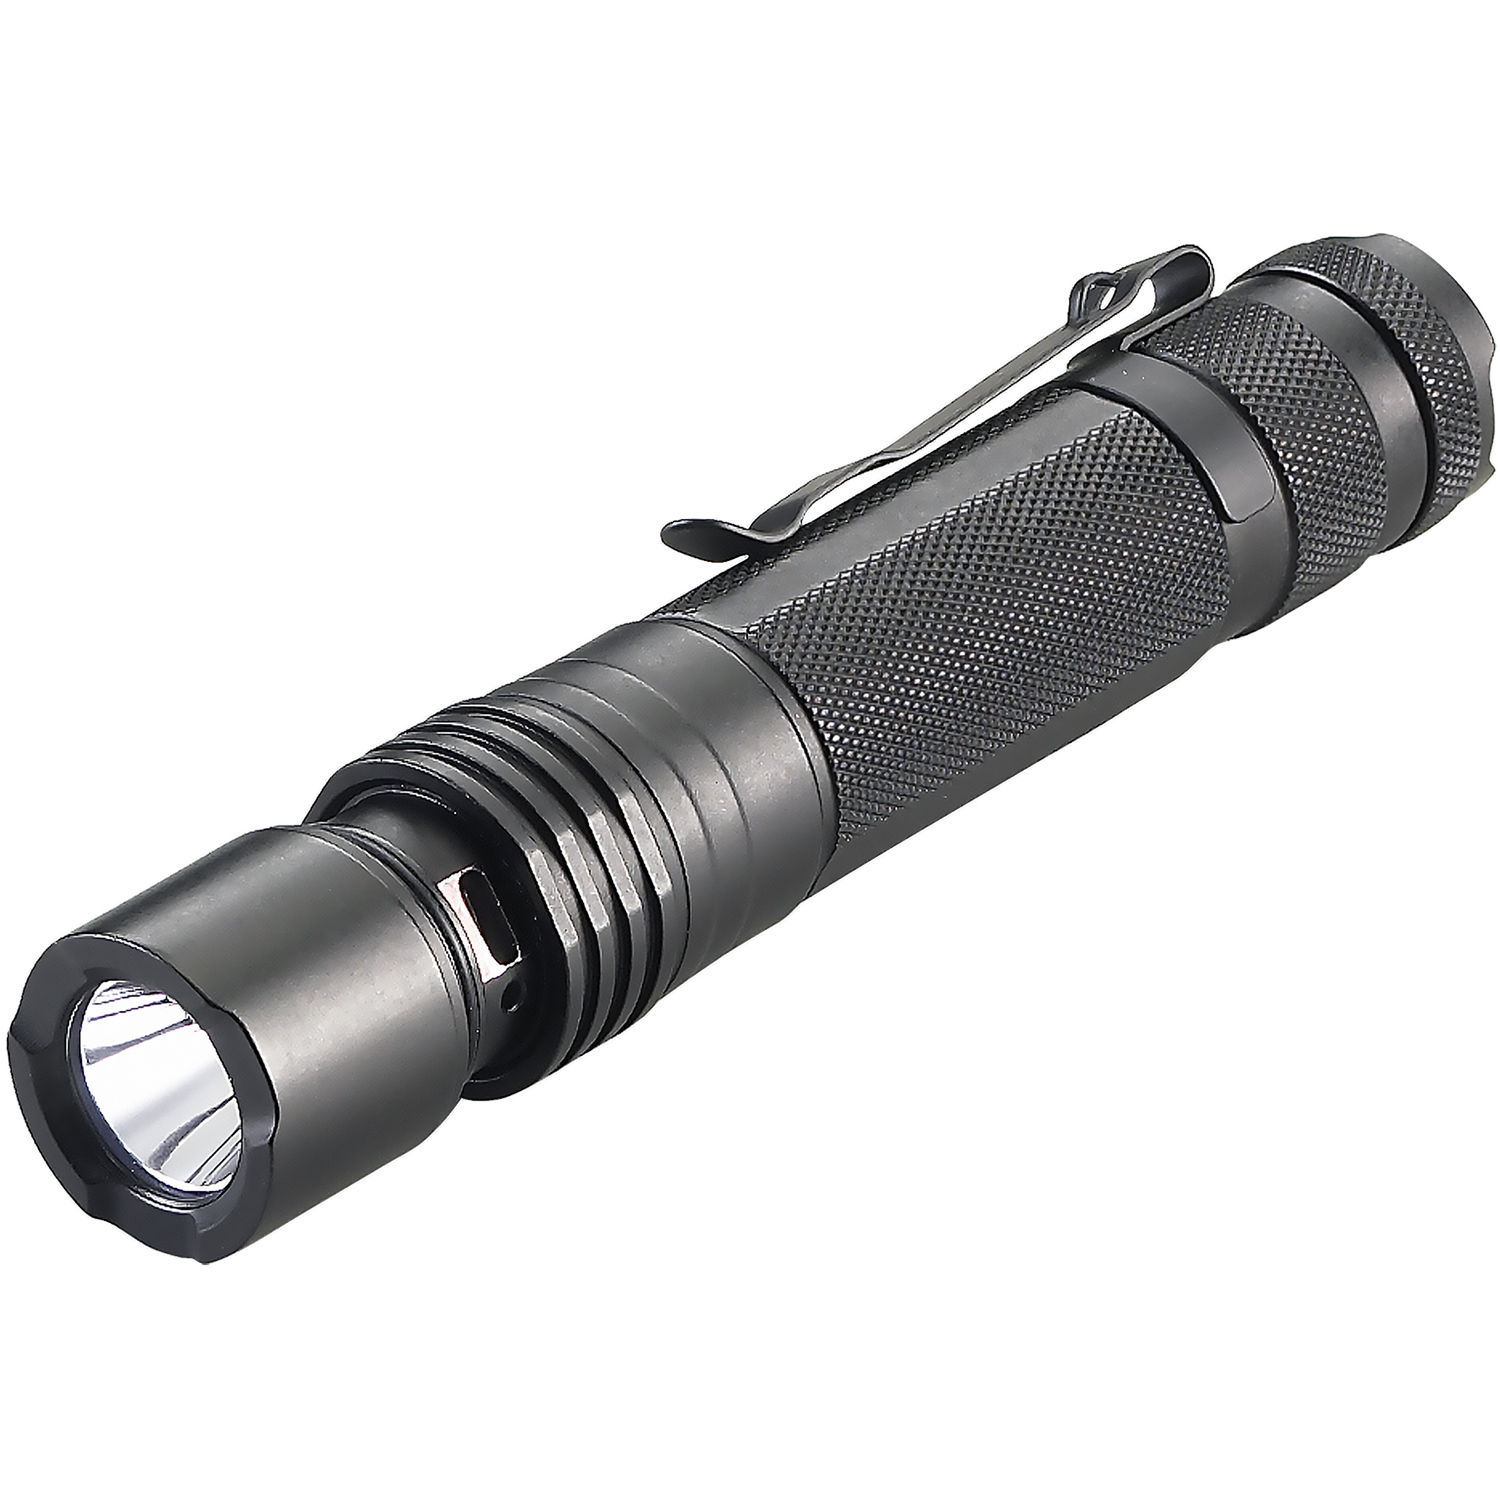 Streamlight ProTac HL USB Rechargeable Tactical Flashlight 88054